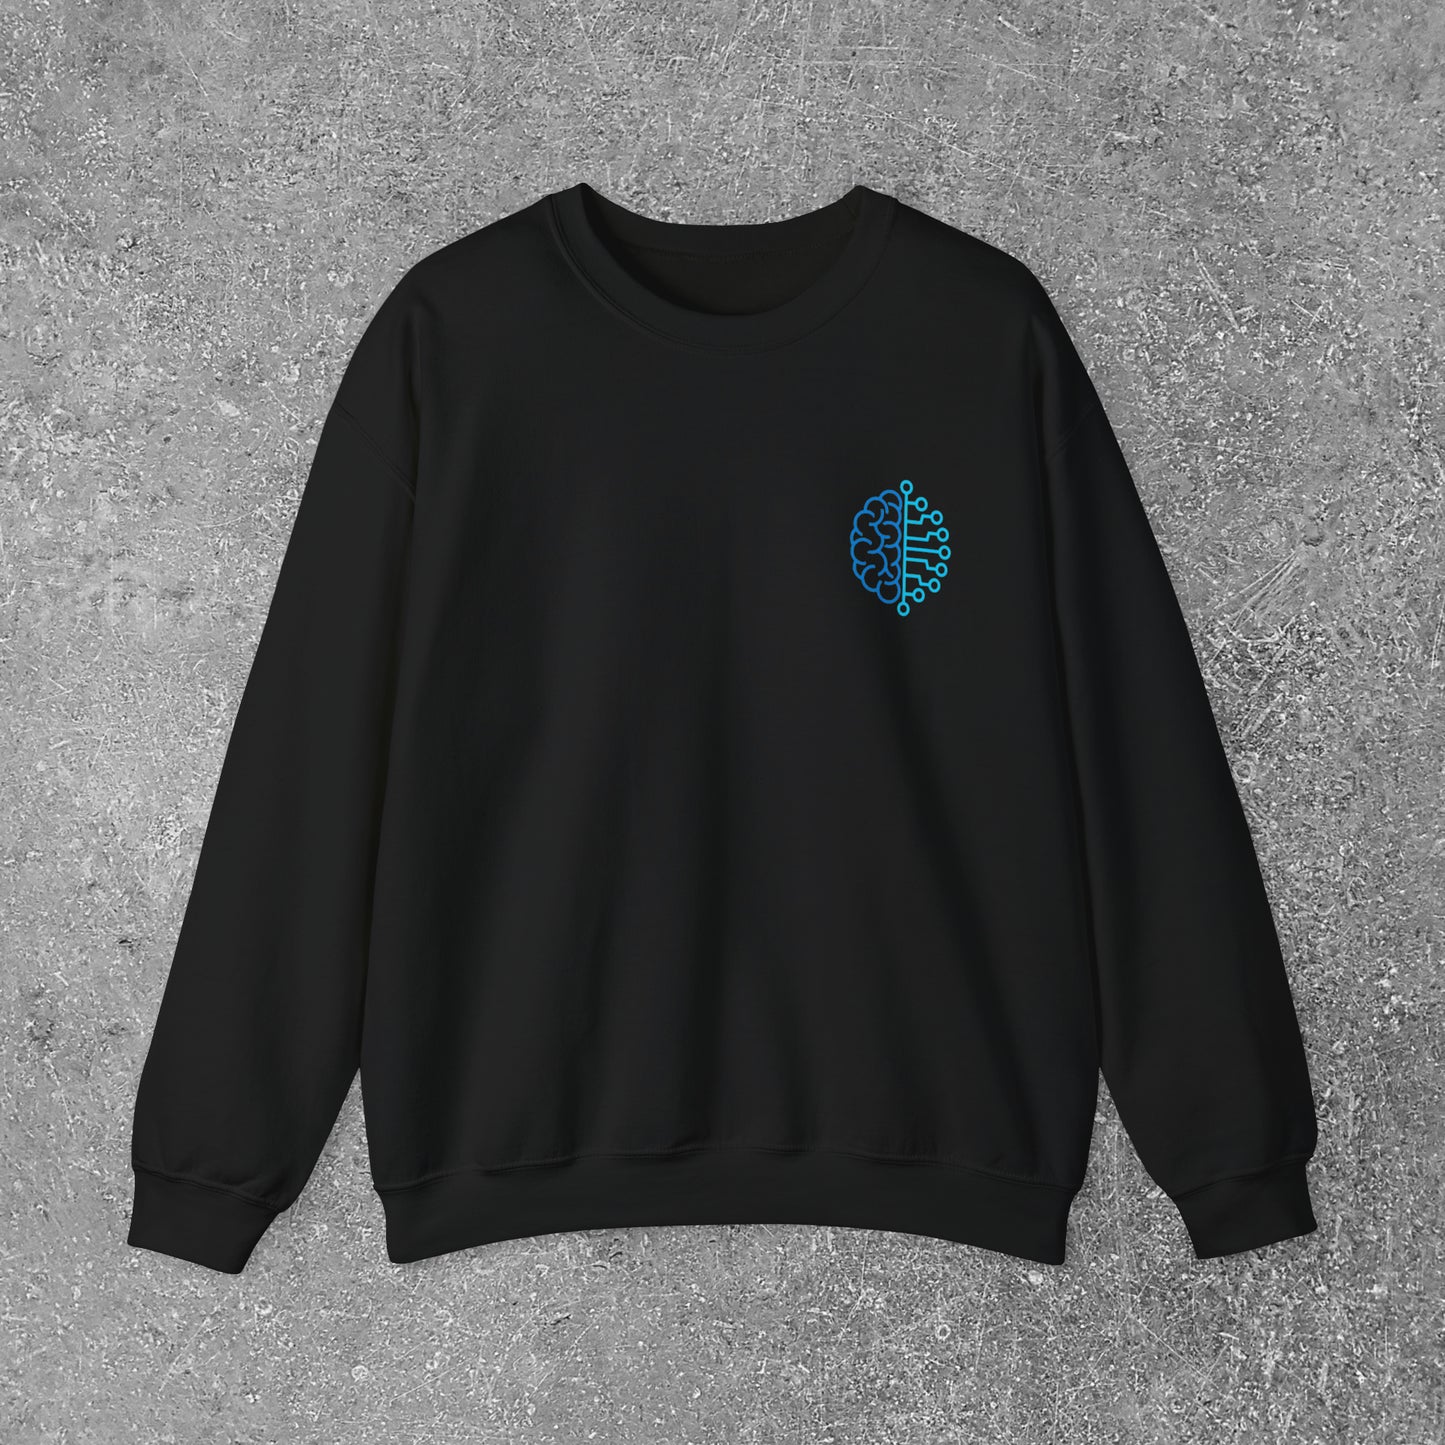 "Stoic’s Silhouette" Long Sleeve